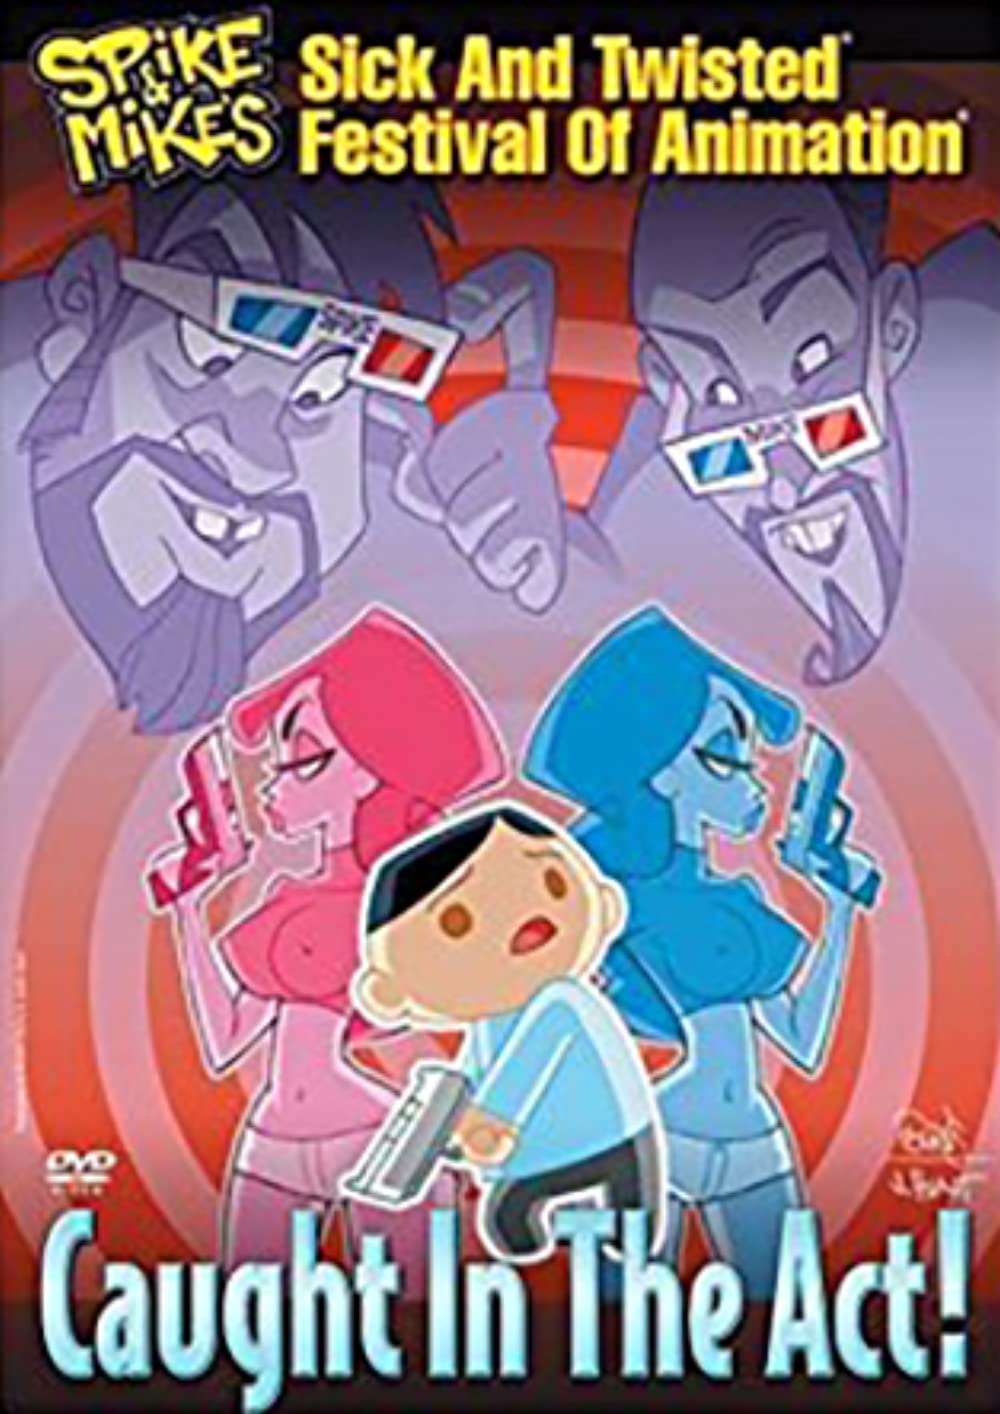 Download Spike and Mike's Sick and Twisted Festival of Animation: Caught in the Act Movie | Watch Spike And Mike's Sick And Twisted Festival Of Animation: Caught In The Act Review